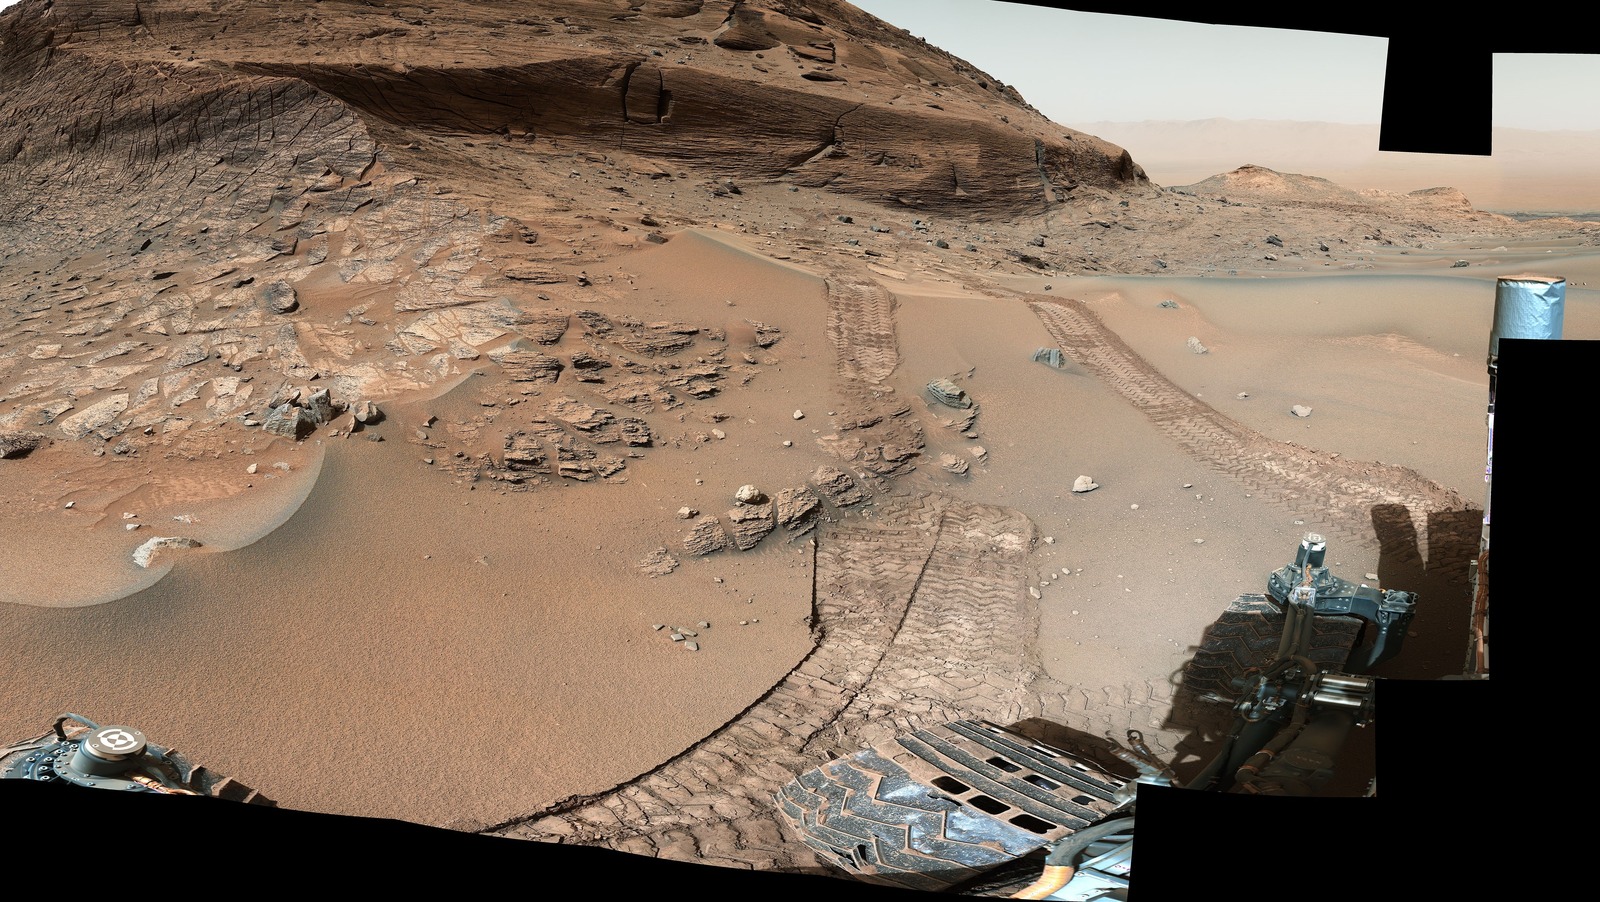 How A Software Update Could Help The Curiosity Rover Travel Across Mars Faster – SlashGear